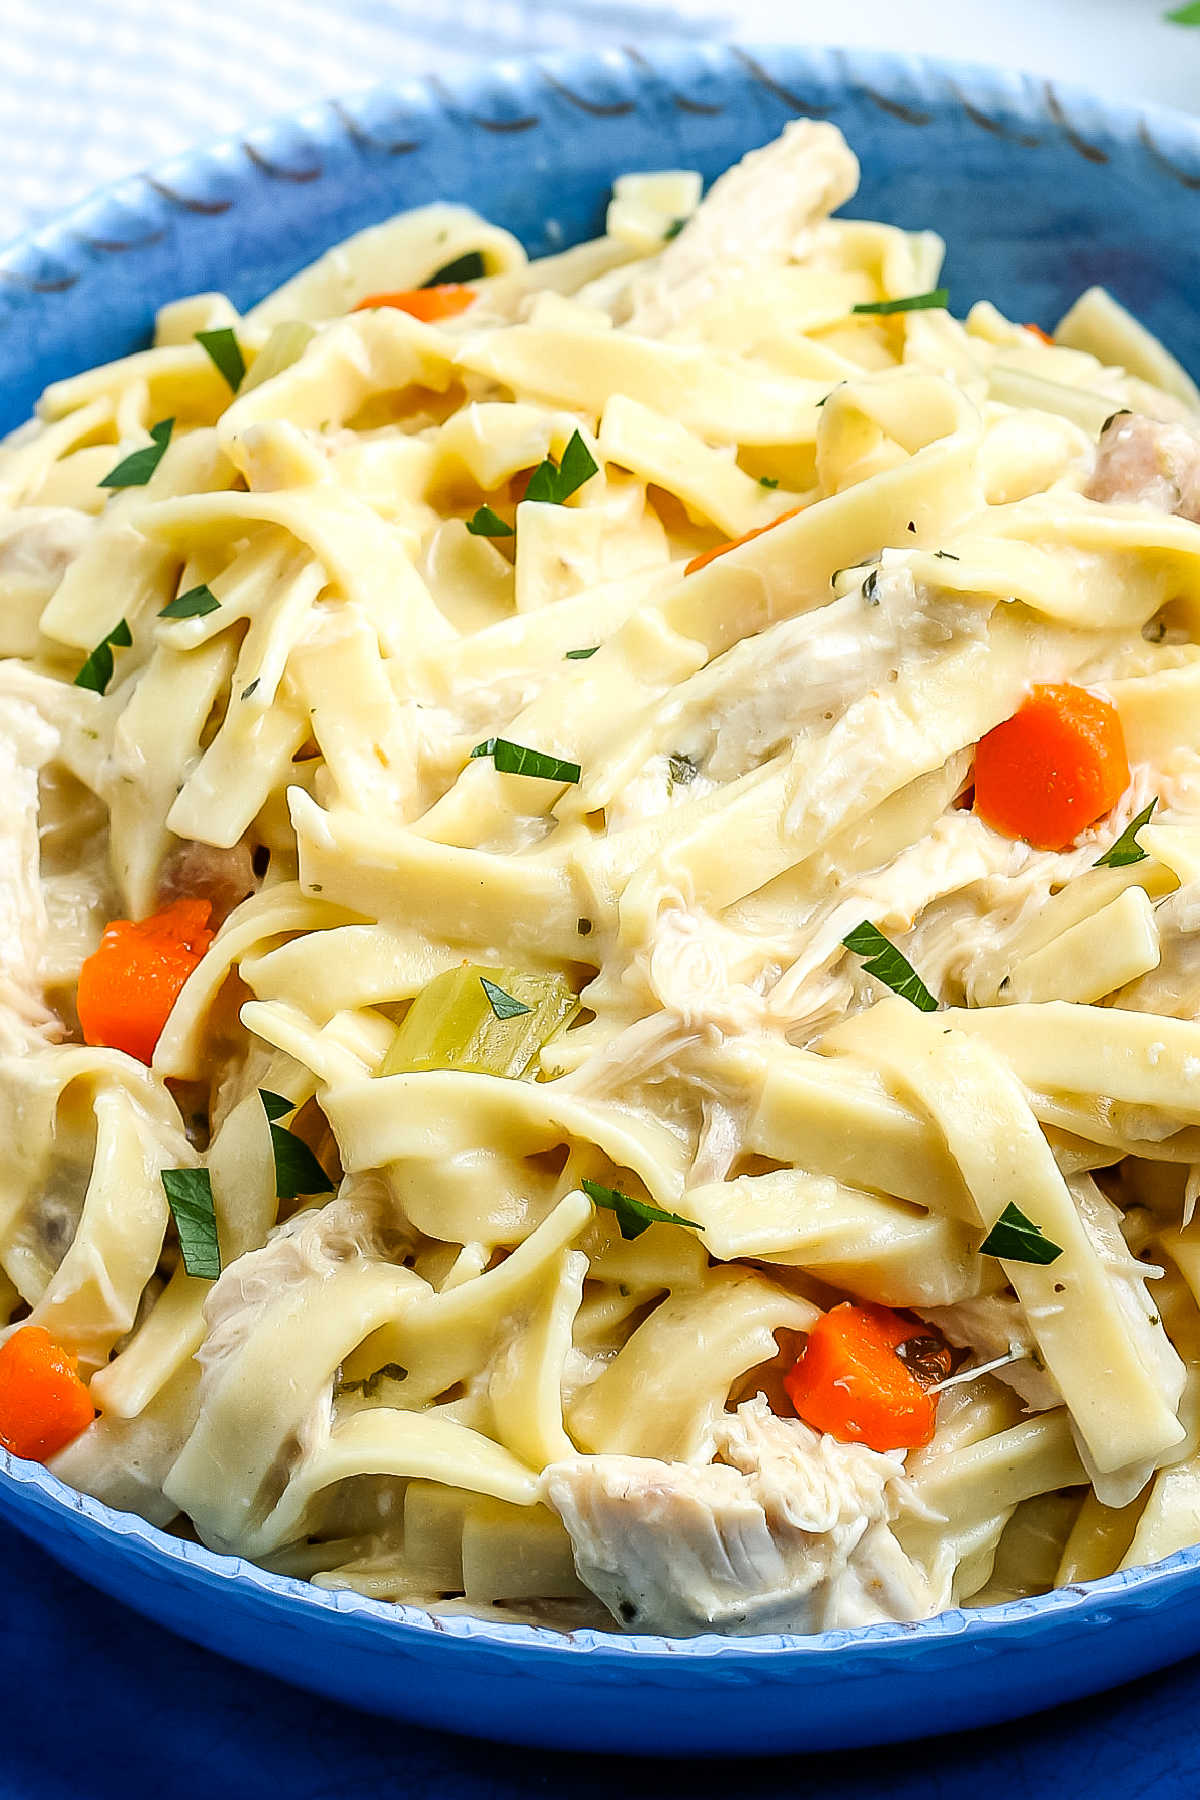 A close up picture of Chicken and Egg Noodles in a blue serving bowl.